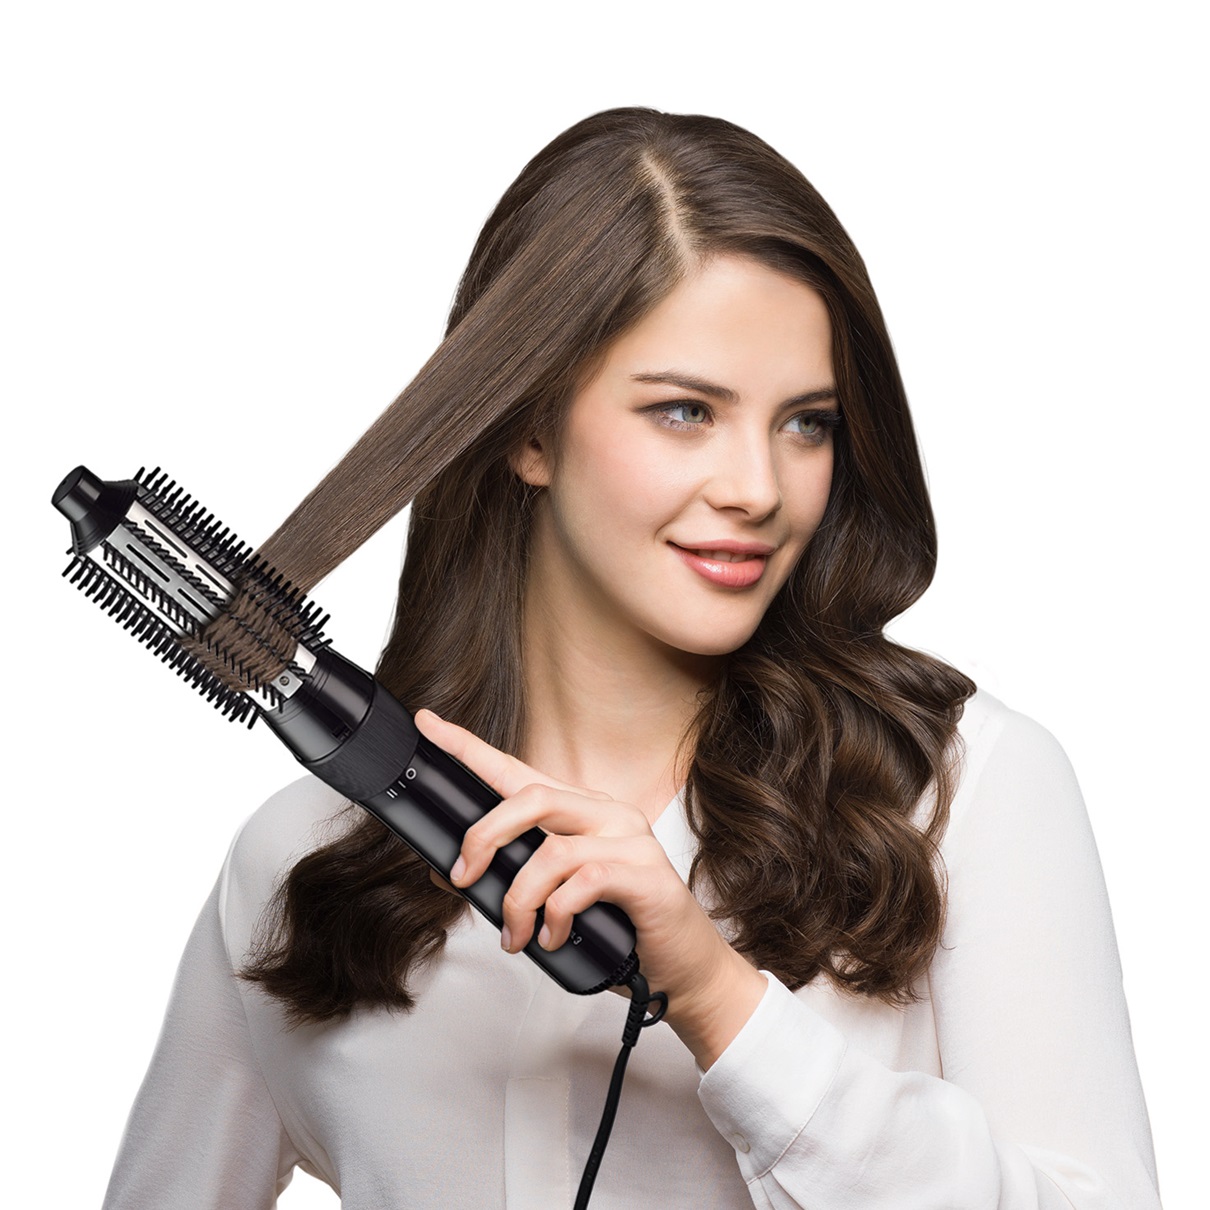 Braun Satin Hair 3 AS330 Airstyler with ceramic protection - in use